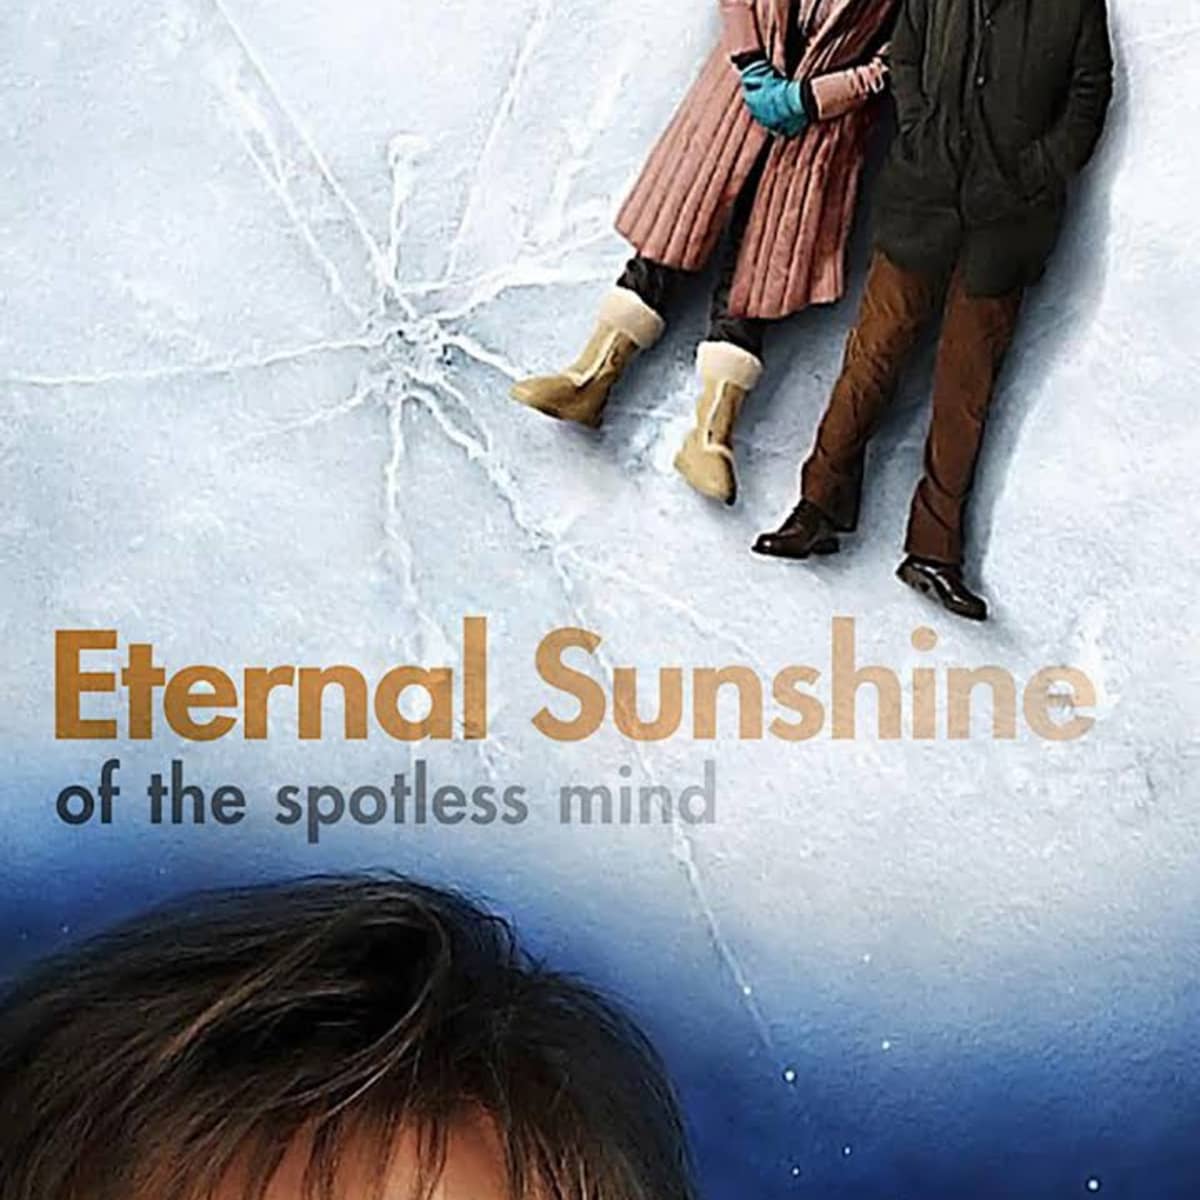 movies similar to eternal sunshine of the spotless mind